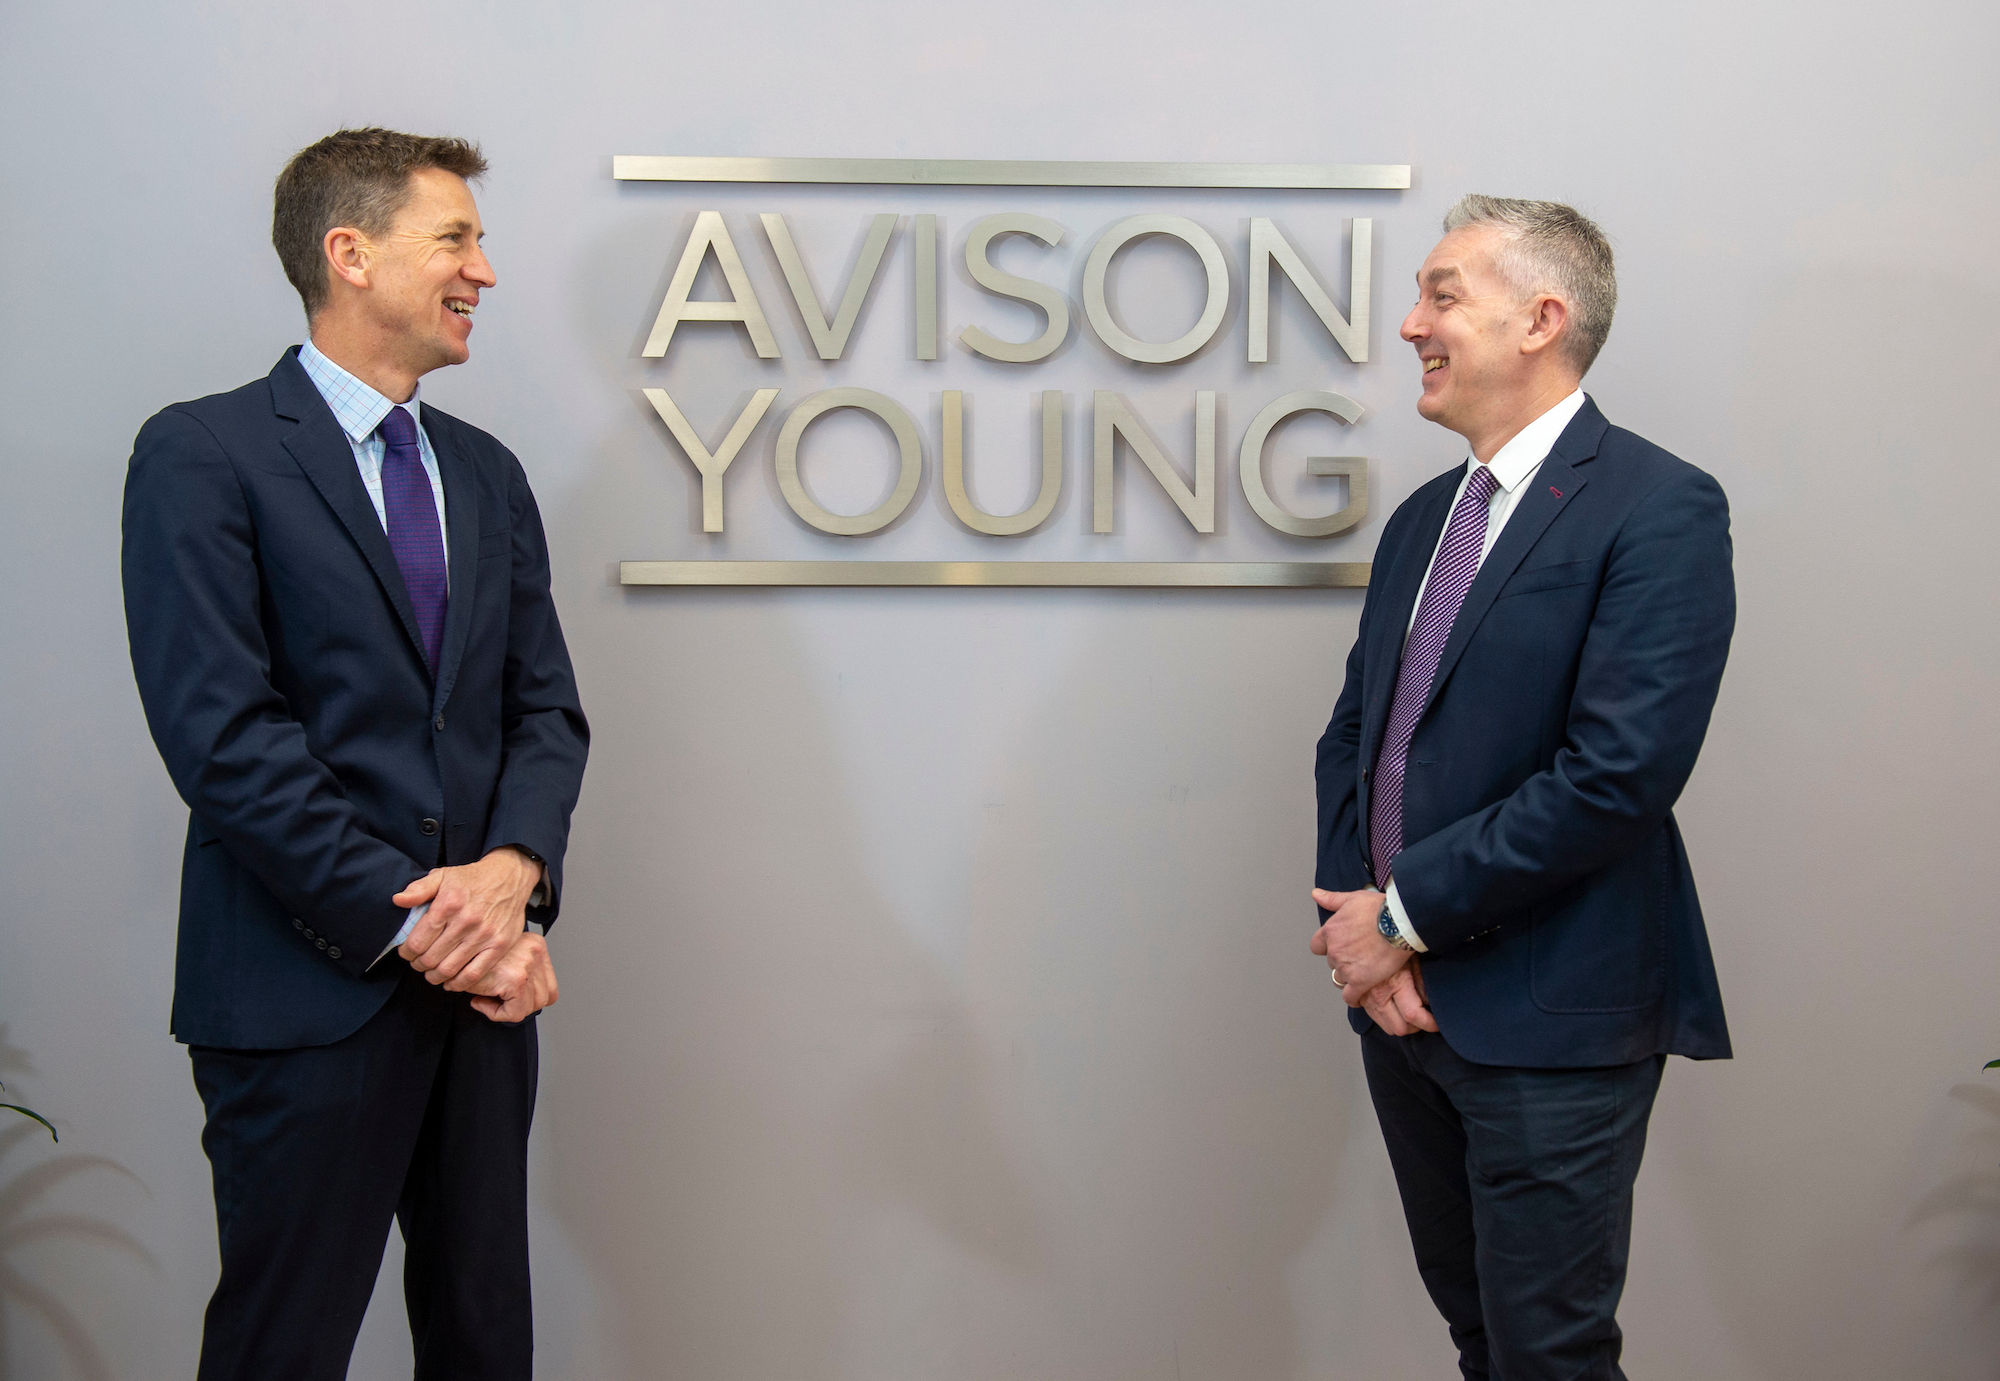 Avison Young sets sight on future growth in Scotland with two senior appointments